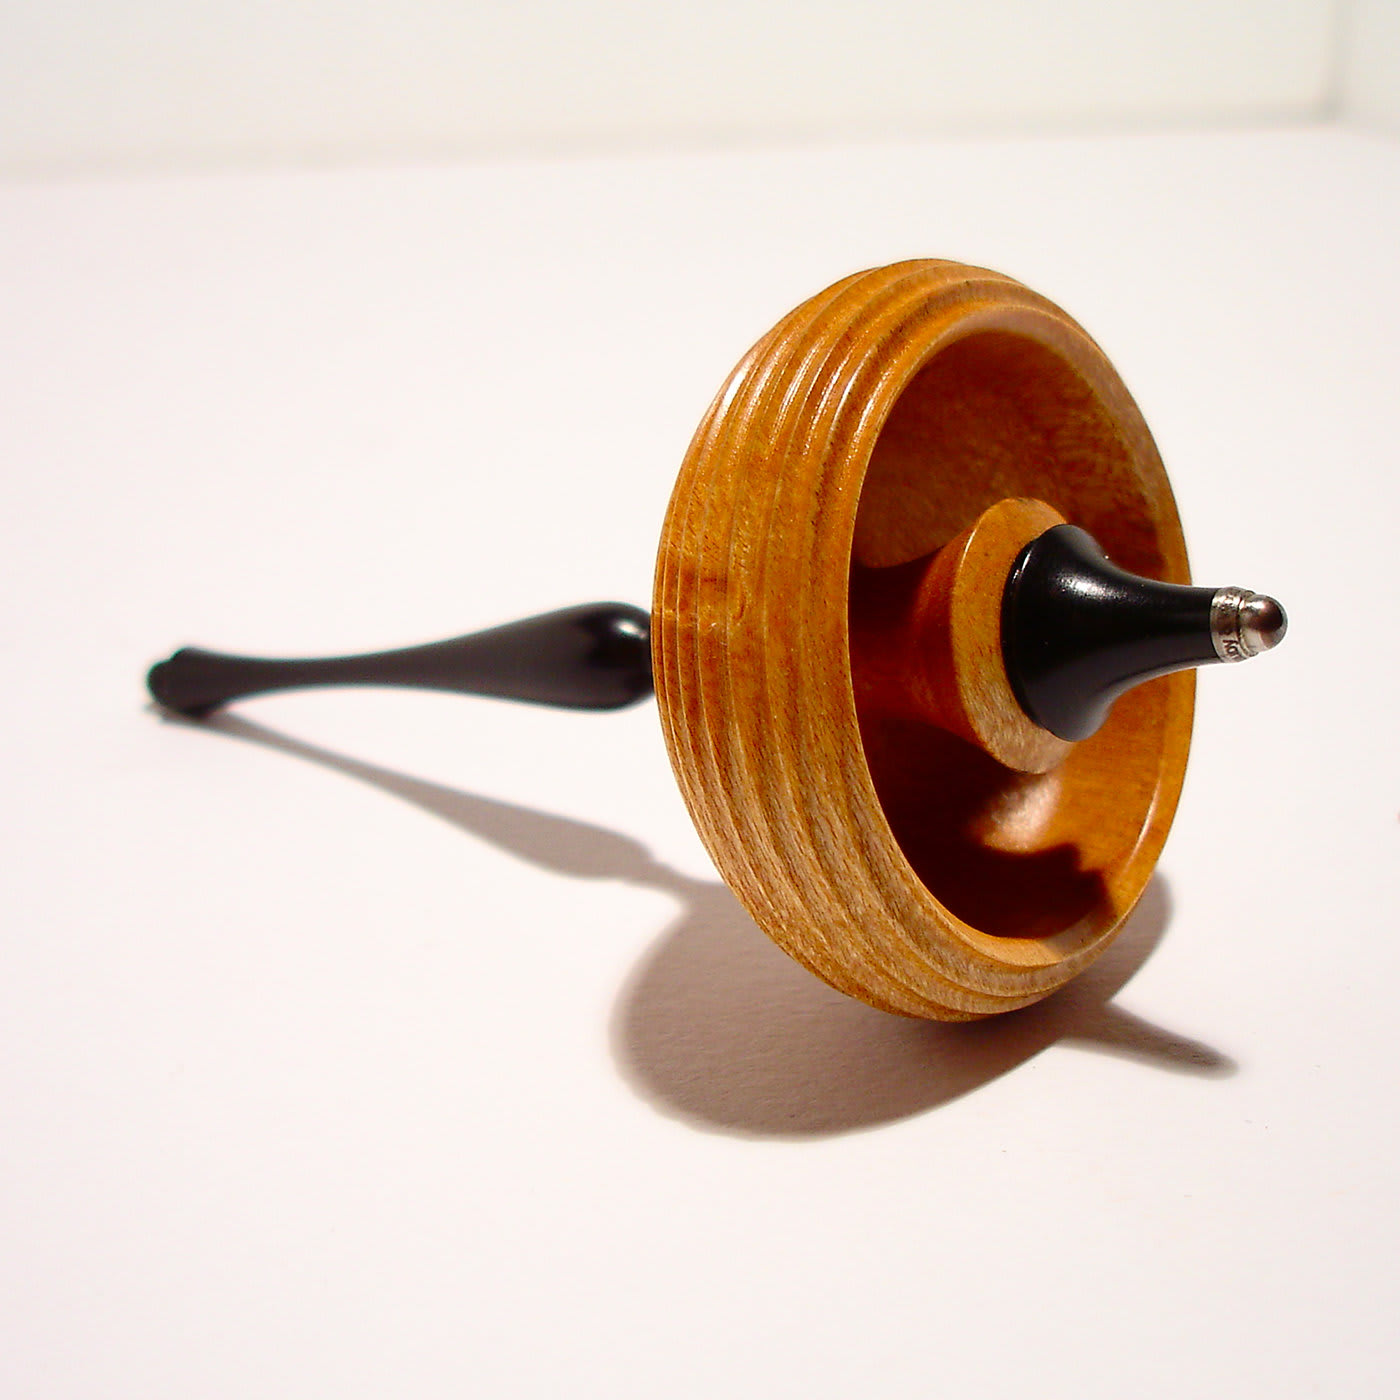 Ebony and Maple Spinning Top #2 - Mauro Sarti